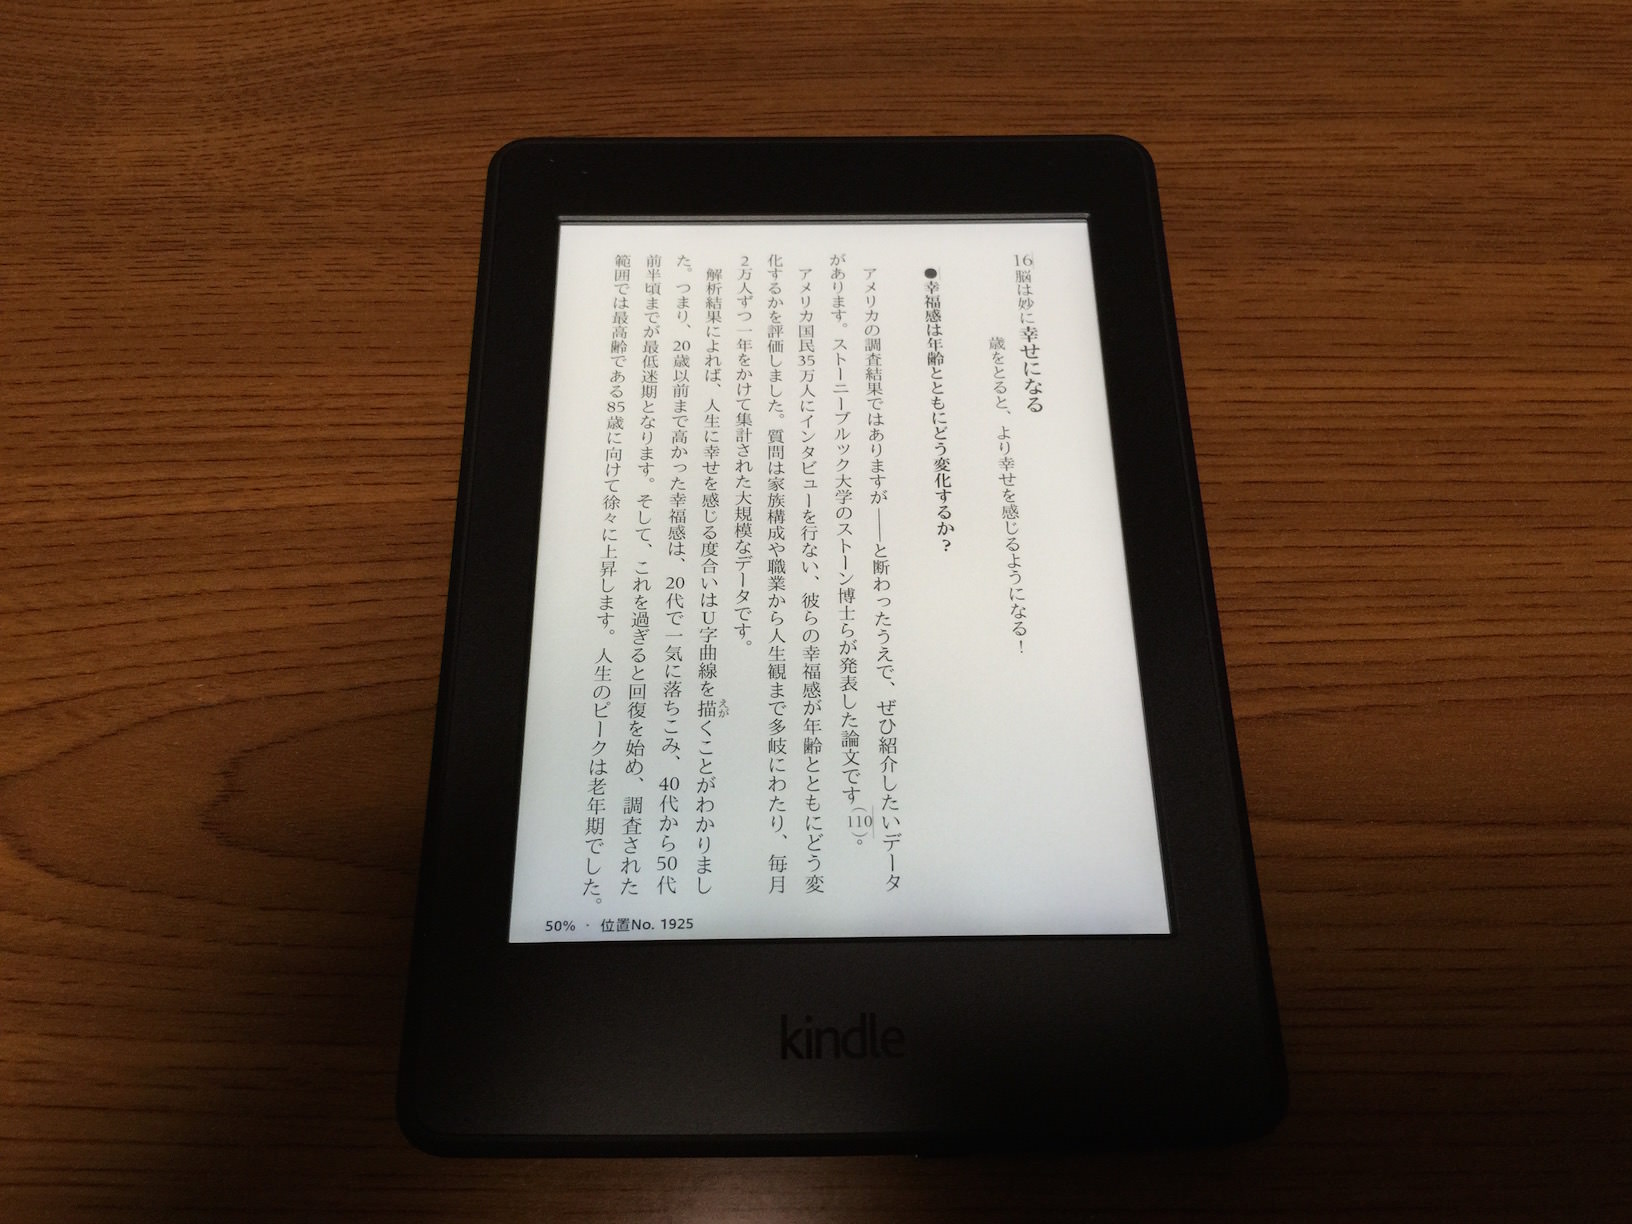 Kindle paperwhite new model 2015 review 6